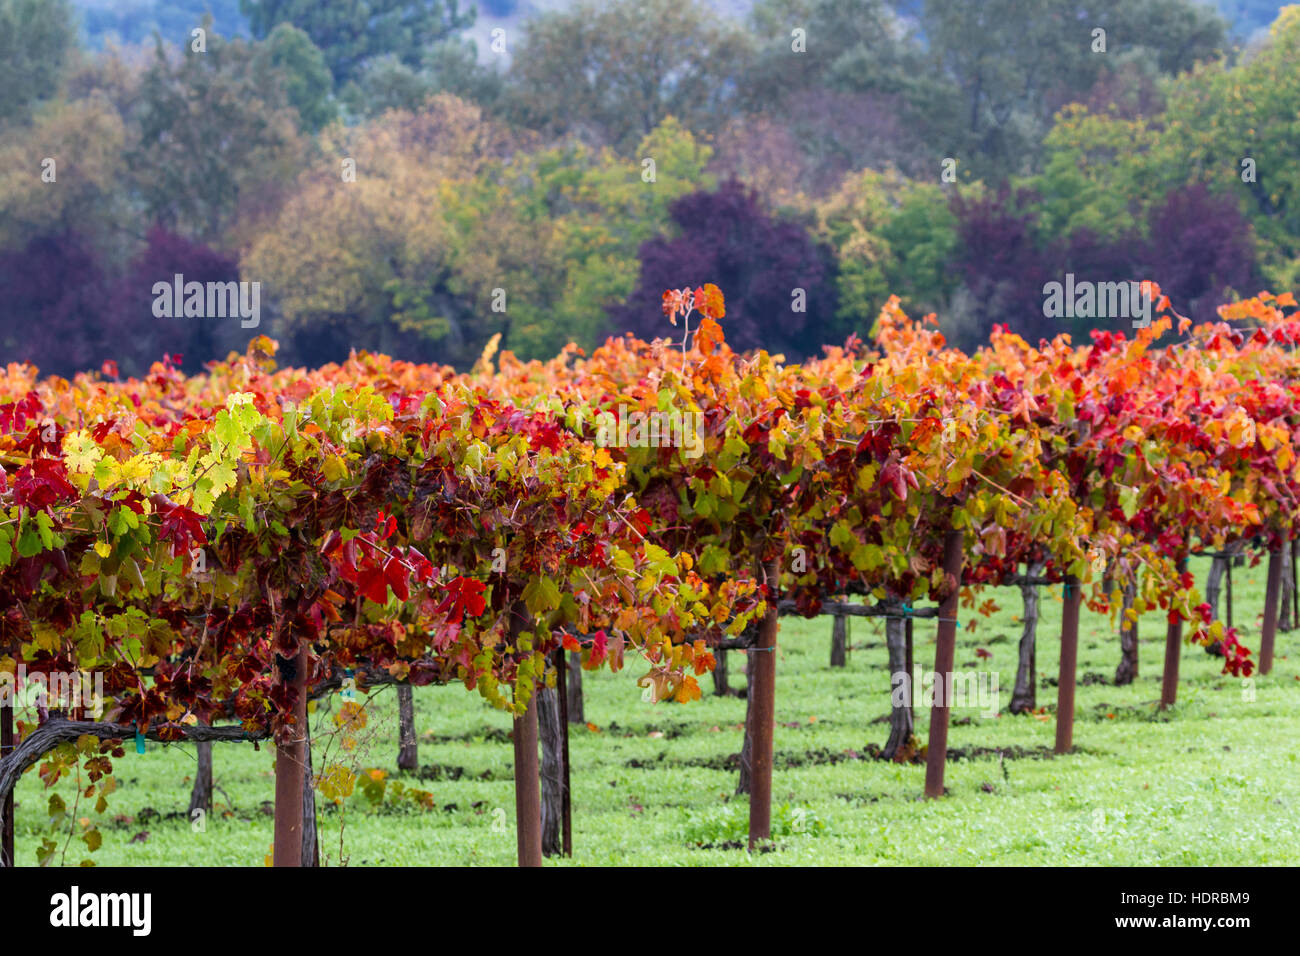 sunrise in a colorful vineyard in Calistoga California due to seasonal changes in autumn Stock Photo